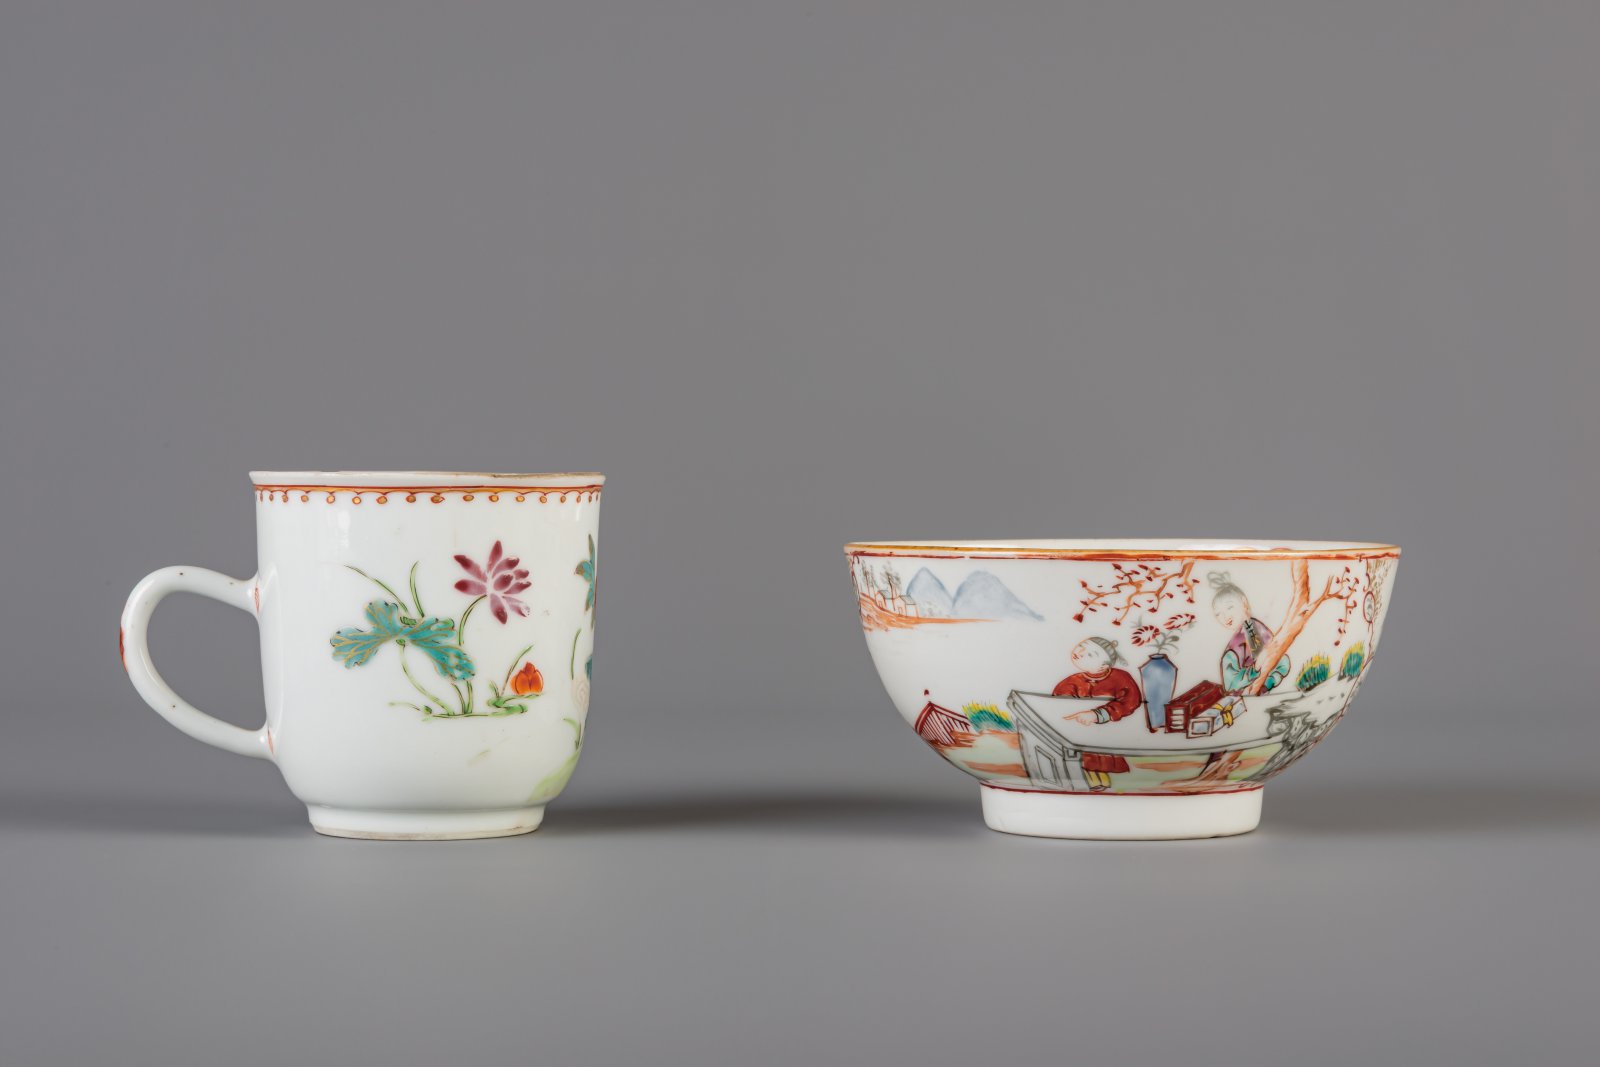 A varied collection of Chinese porcelain, 18th/19th C. - Image 8 of 13